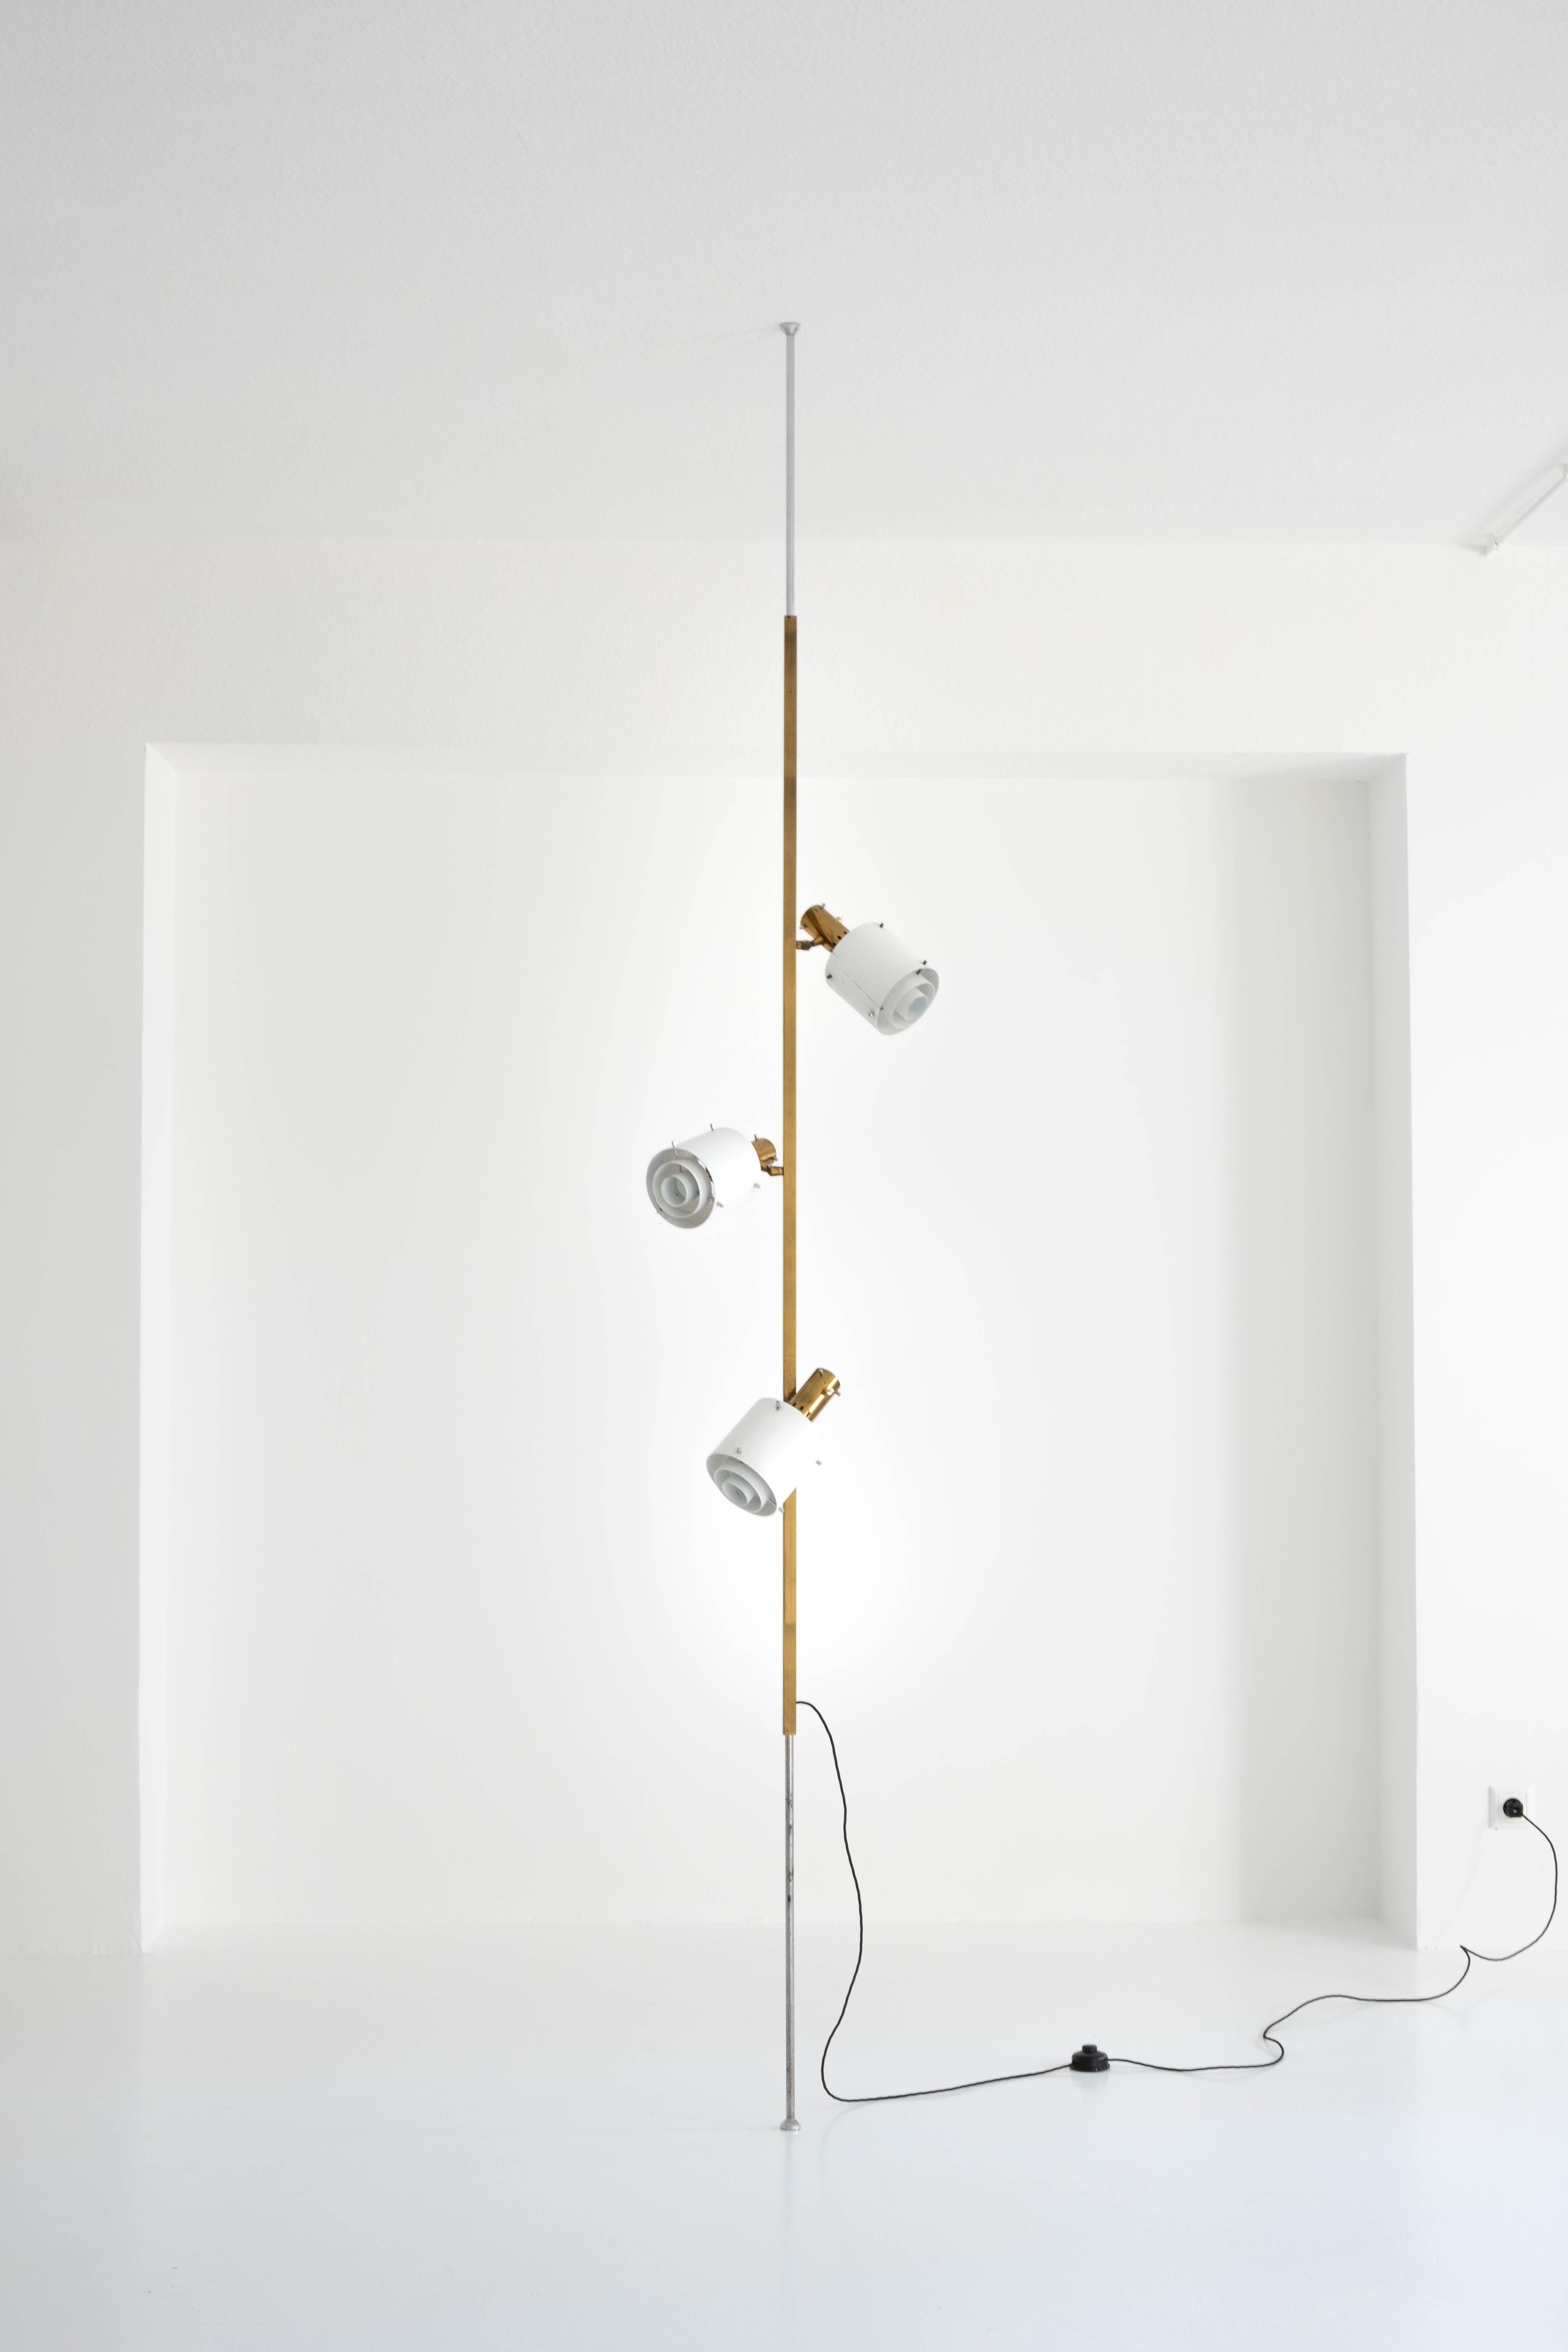 Unique and rare italian luminaire that is clamped between the ceiling and the floor by an internally seated spring.

the two outer rods touching the floor and deck are made of chrome-plated round steel tubing, with not much left of the